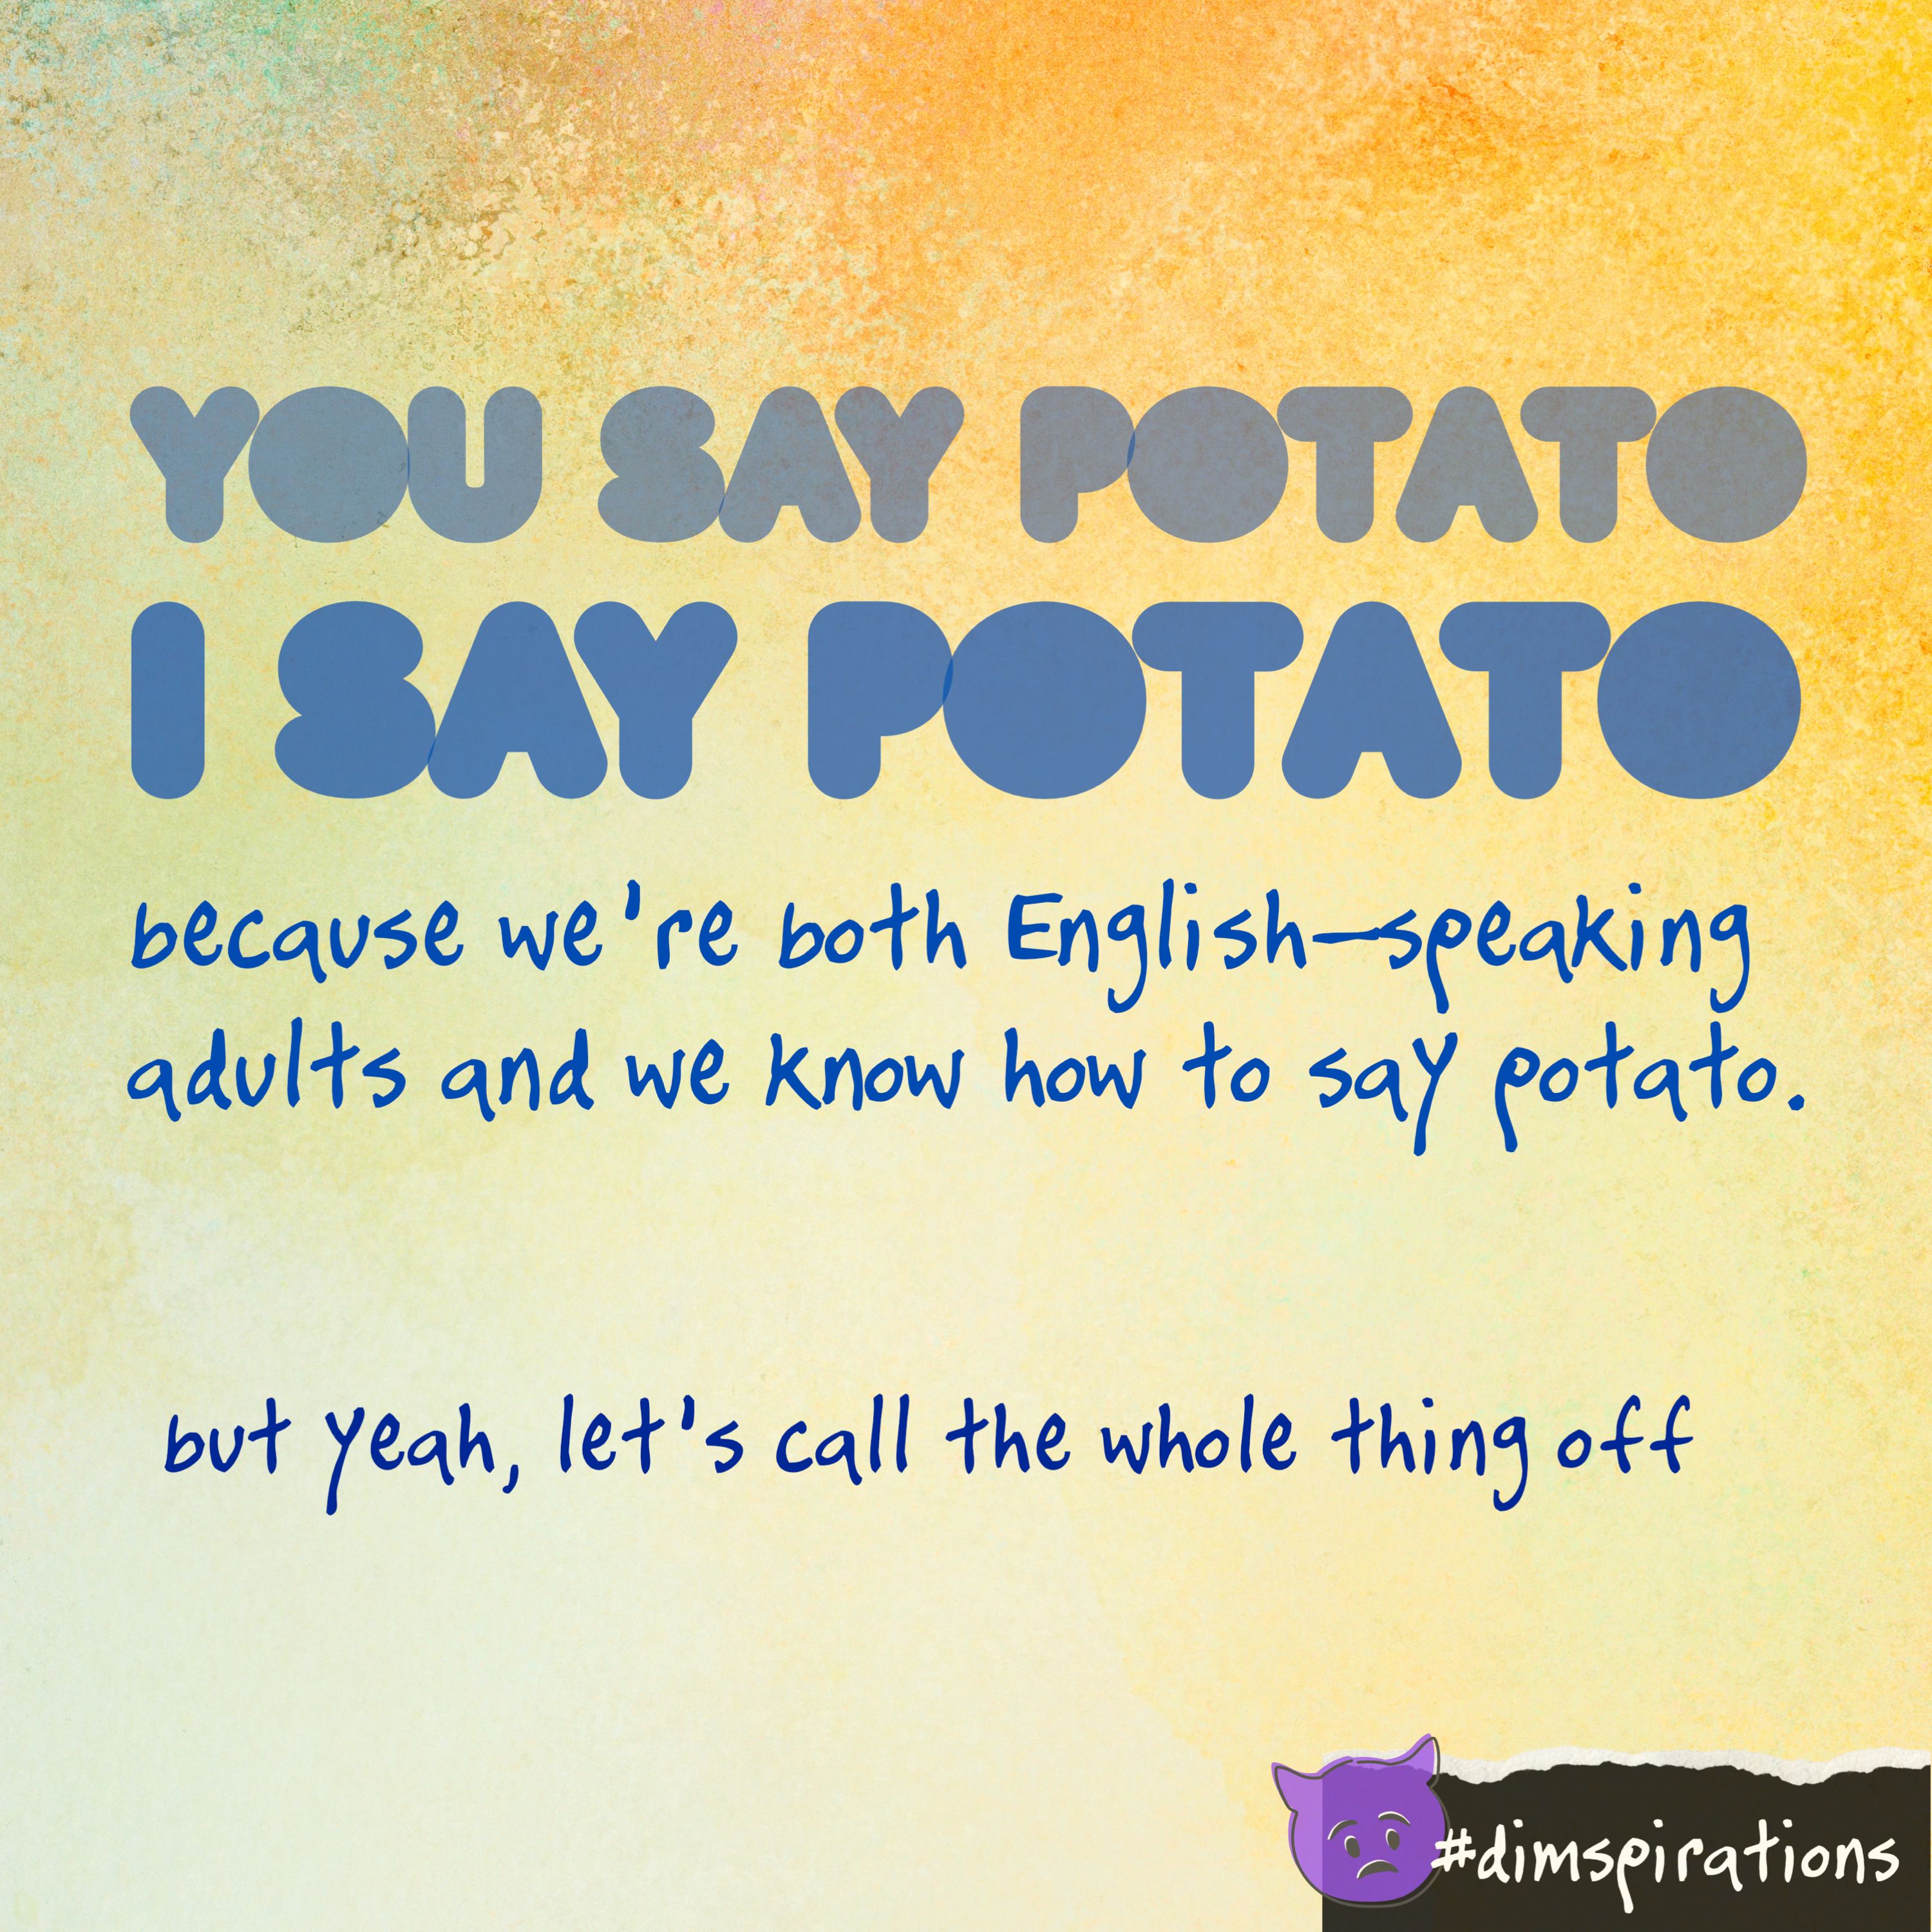 You say potato, I say potato, because we're both English-speaking adults and we know how to say potato. But yeah, let's call the whole thing off.